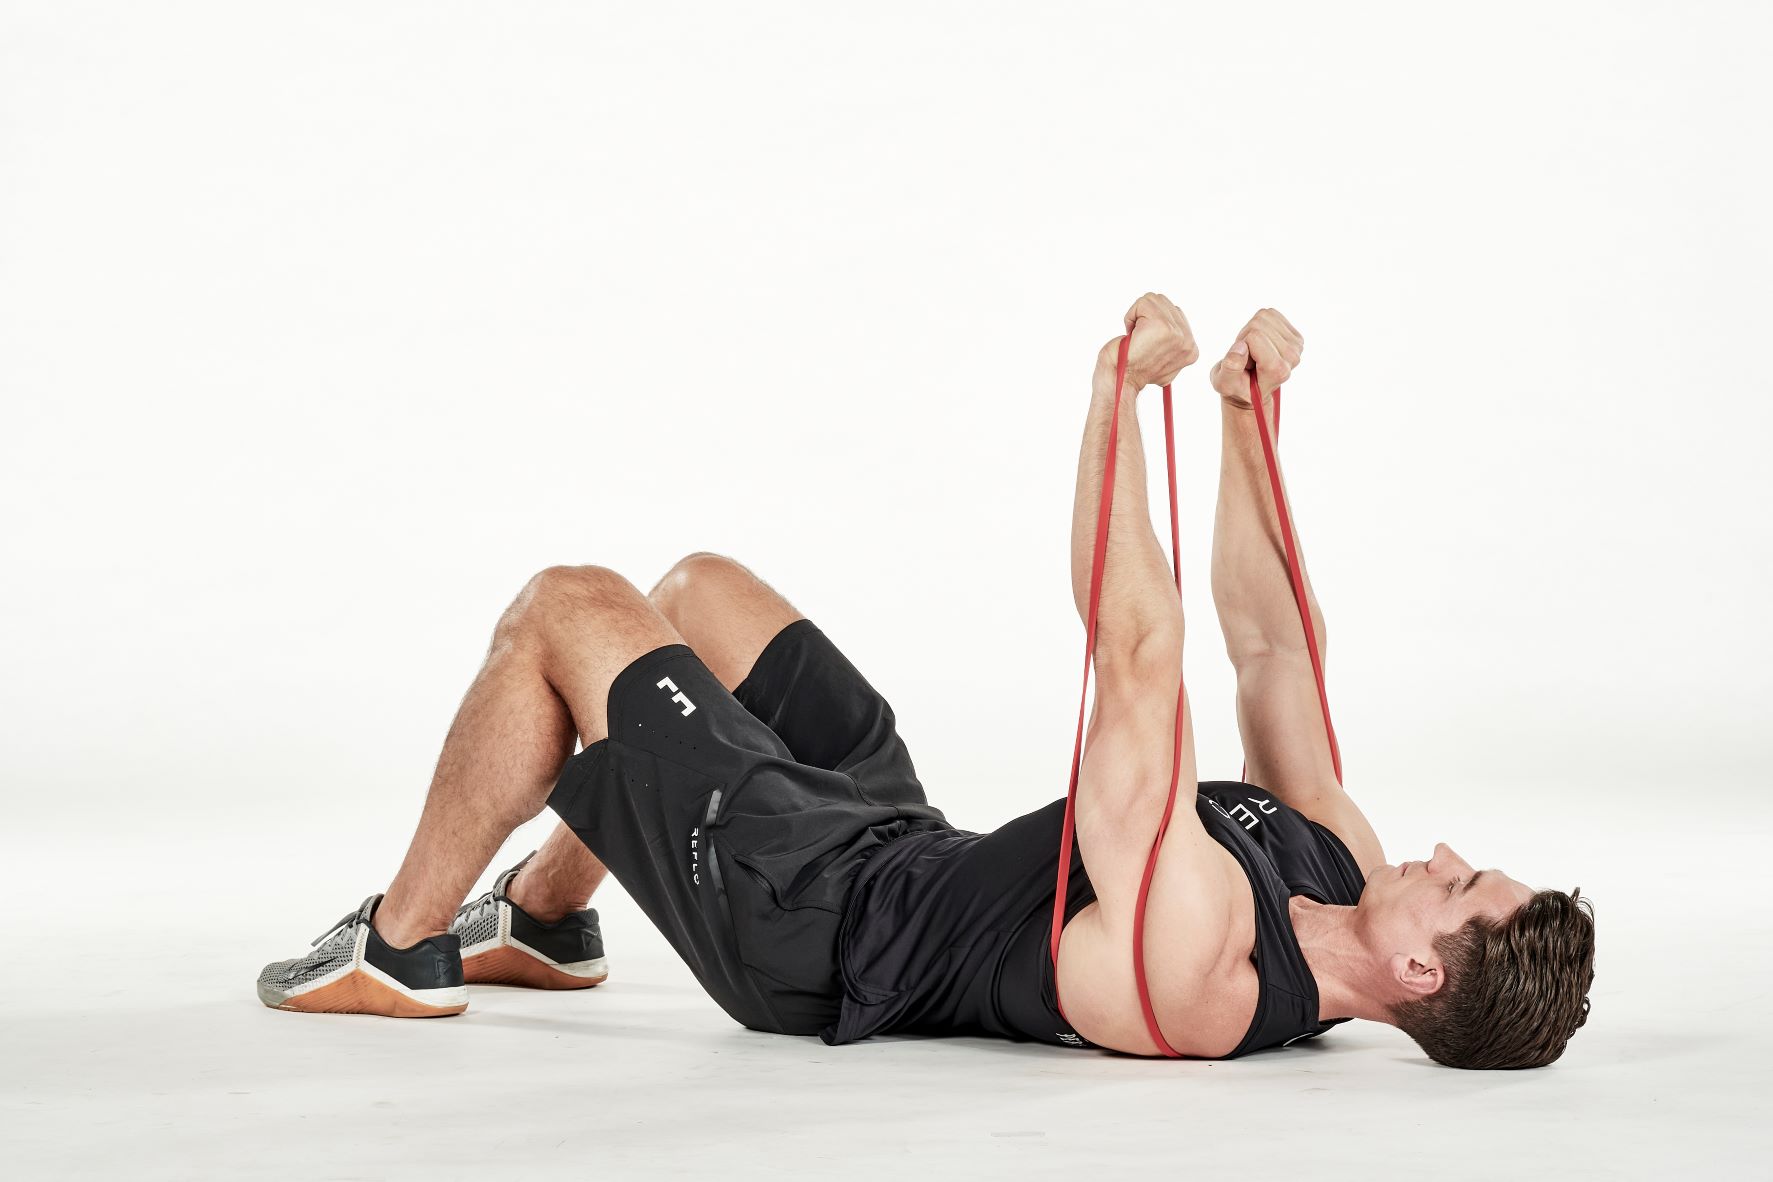 man demonstrating step two of lying chest press; laying on his back with bent knees, the band is passed under his back; holding one end of the resistance band in each hand, he extends his arms up towards the ceiling; he wears a black fitness vest, black shorts and trainers